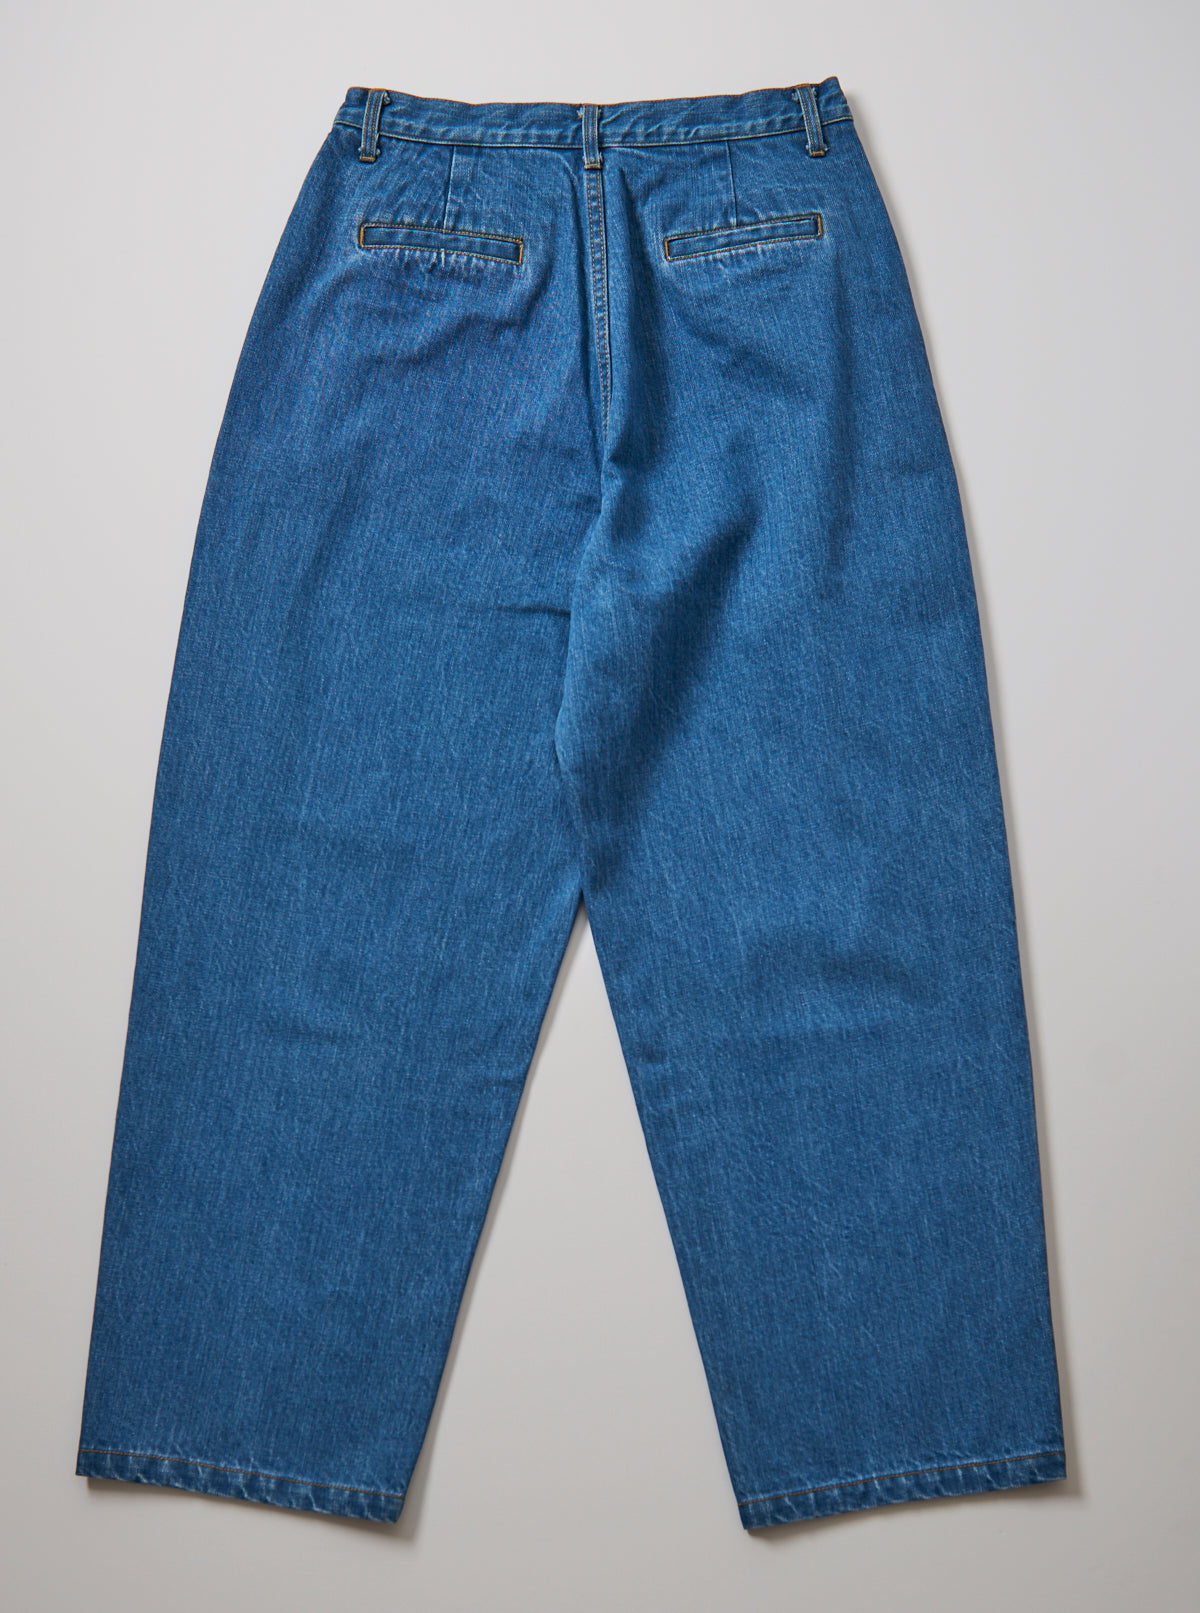  Vinti Andrews Two tones Tailor Jeans